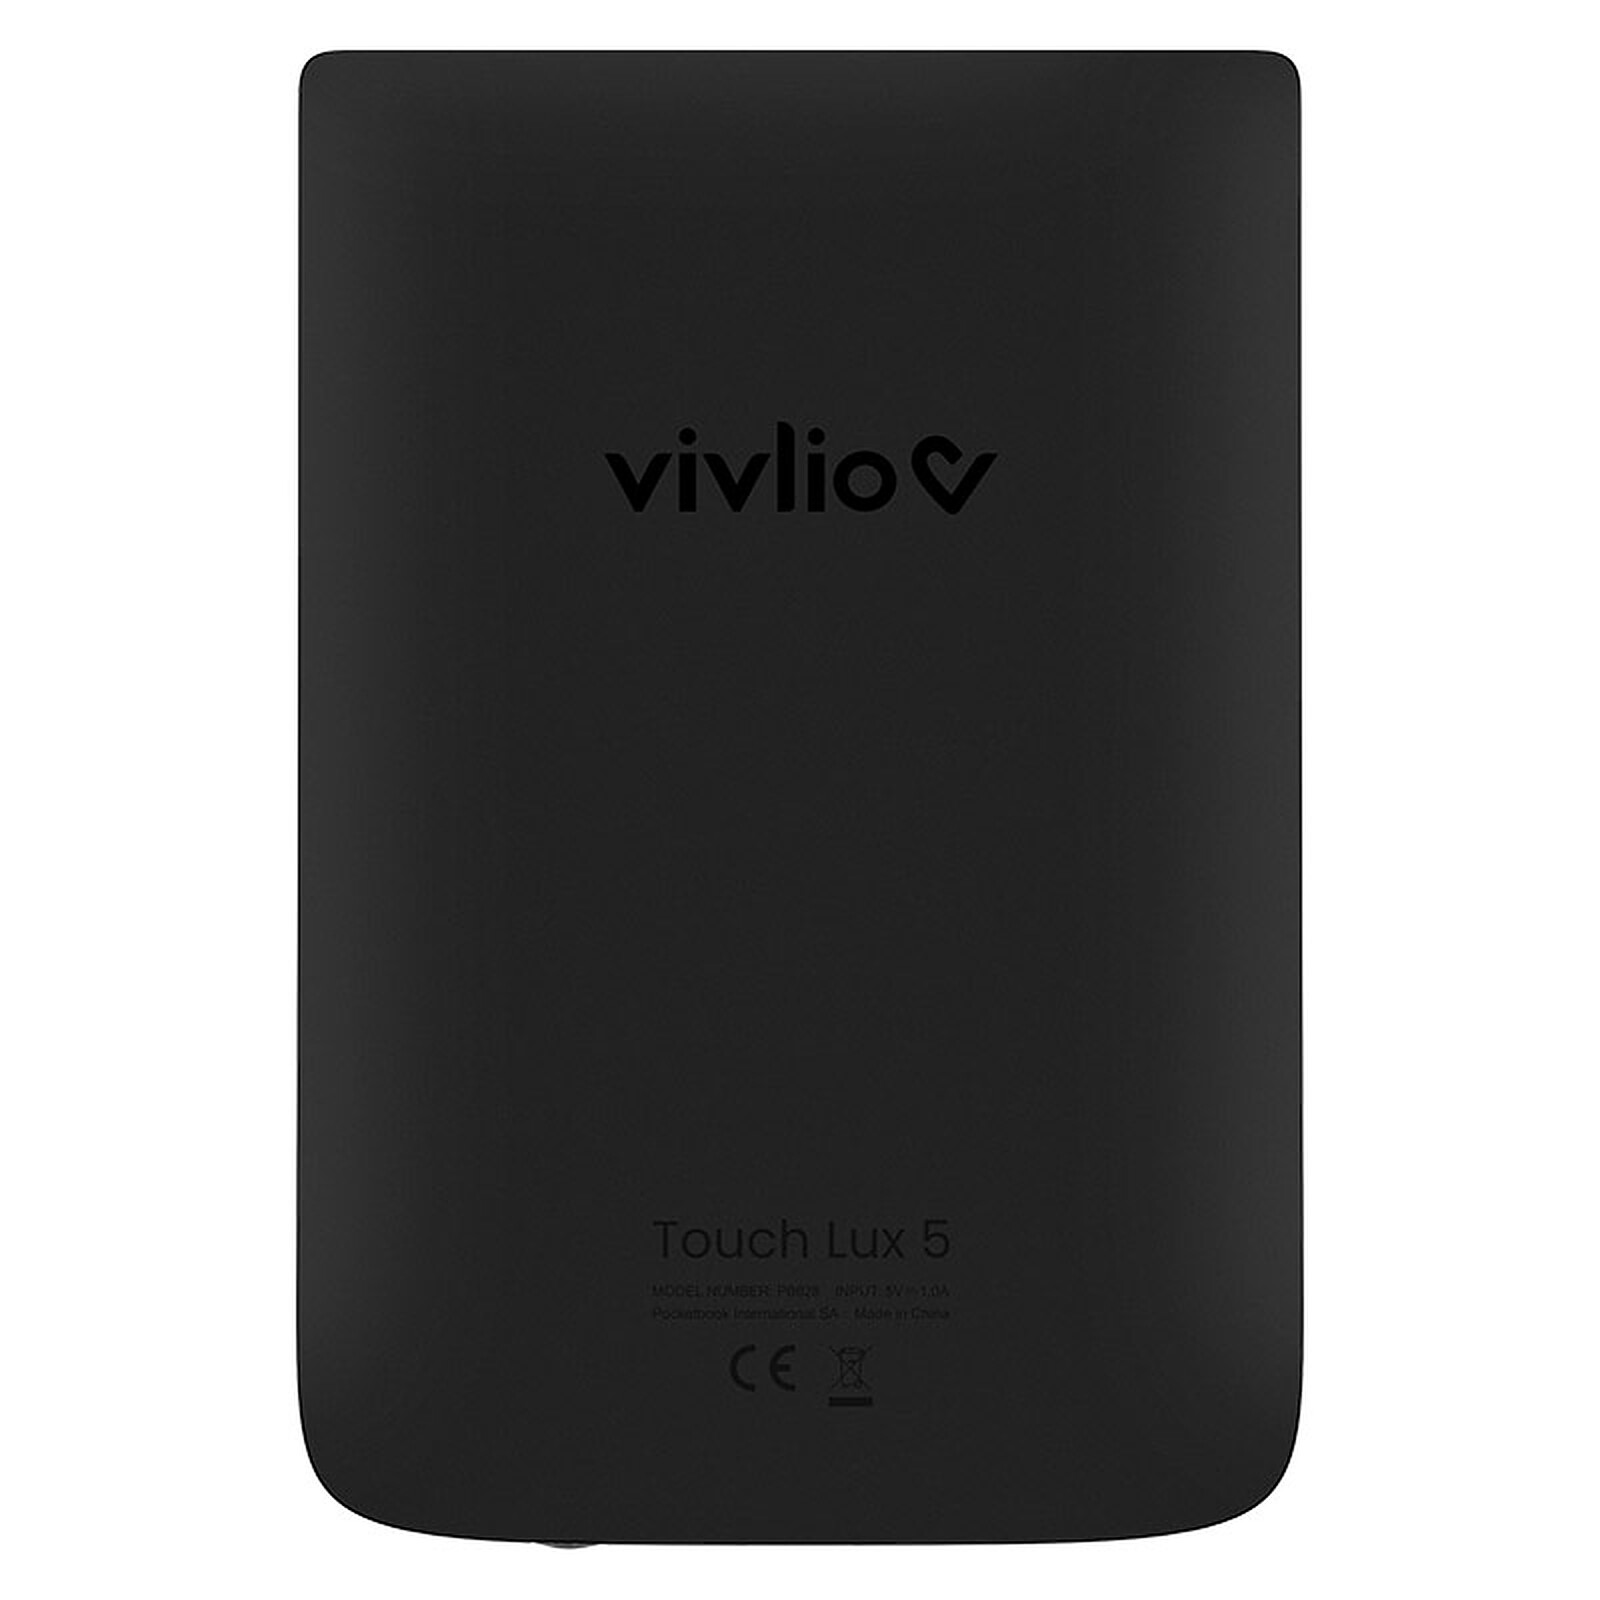 Vivlio Touch HD Plus Copper/Black eBook Pack FREE China Green Case -  E-reader - LDLC 3-year warranty